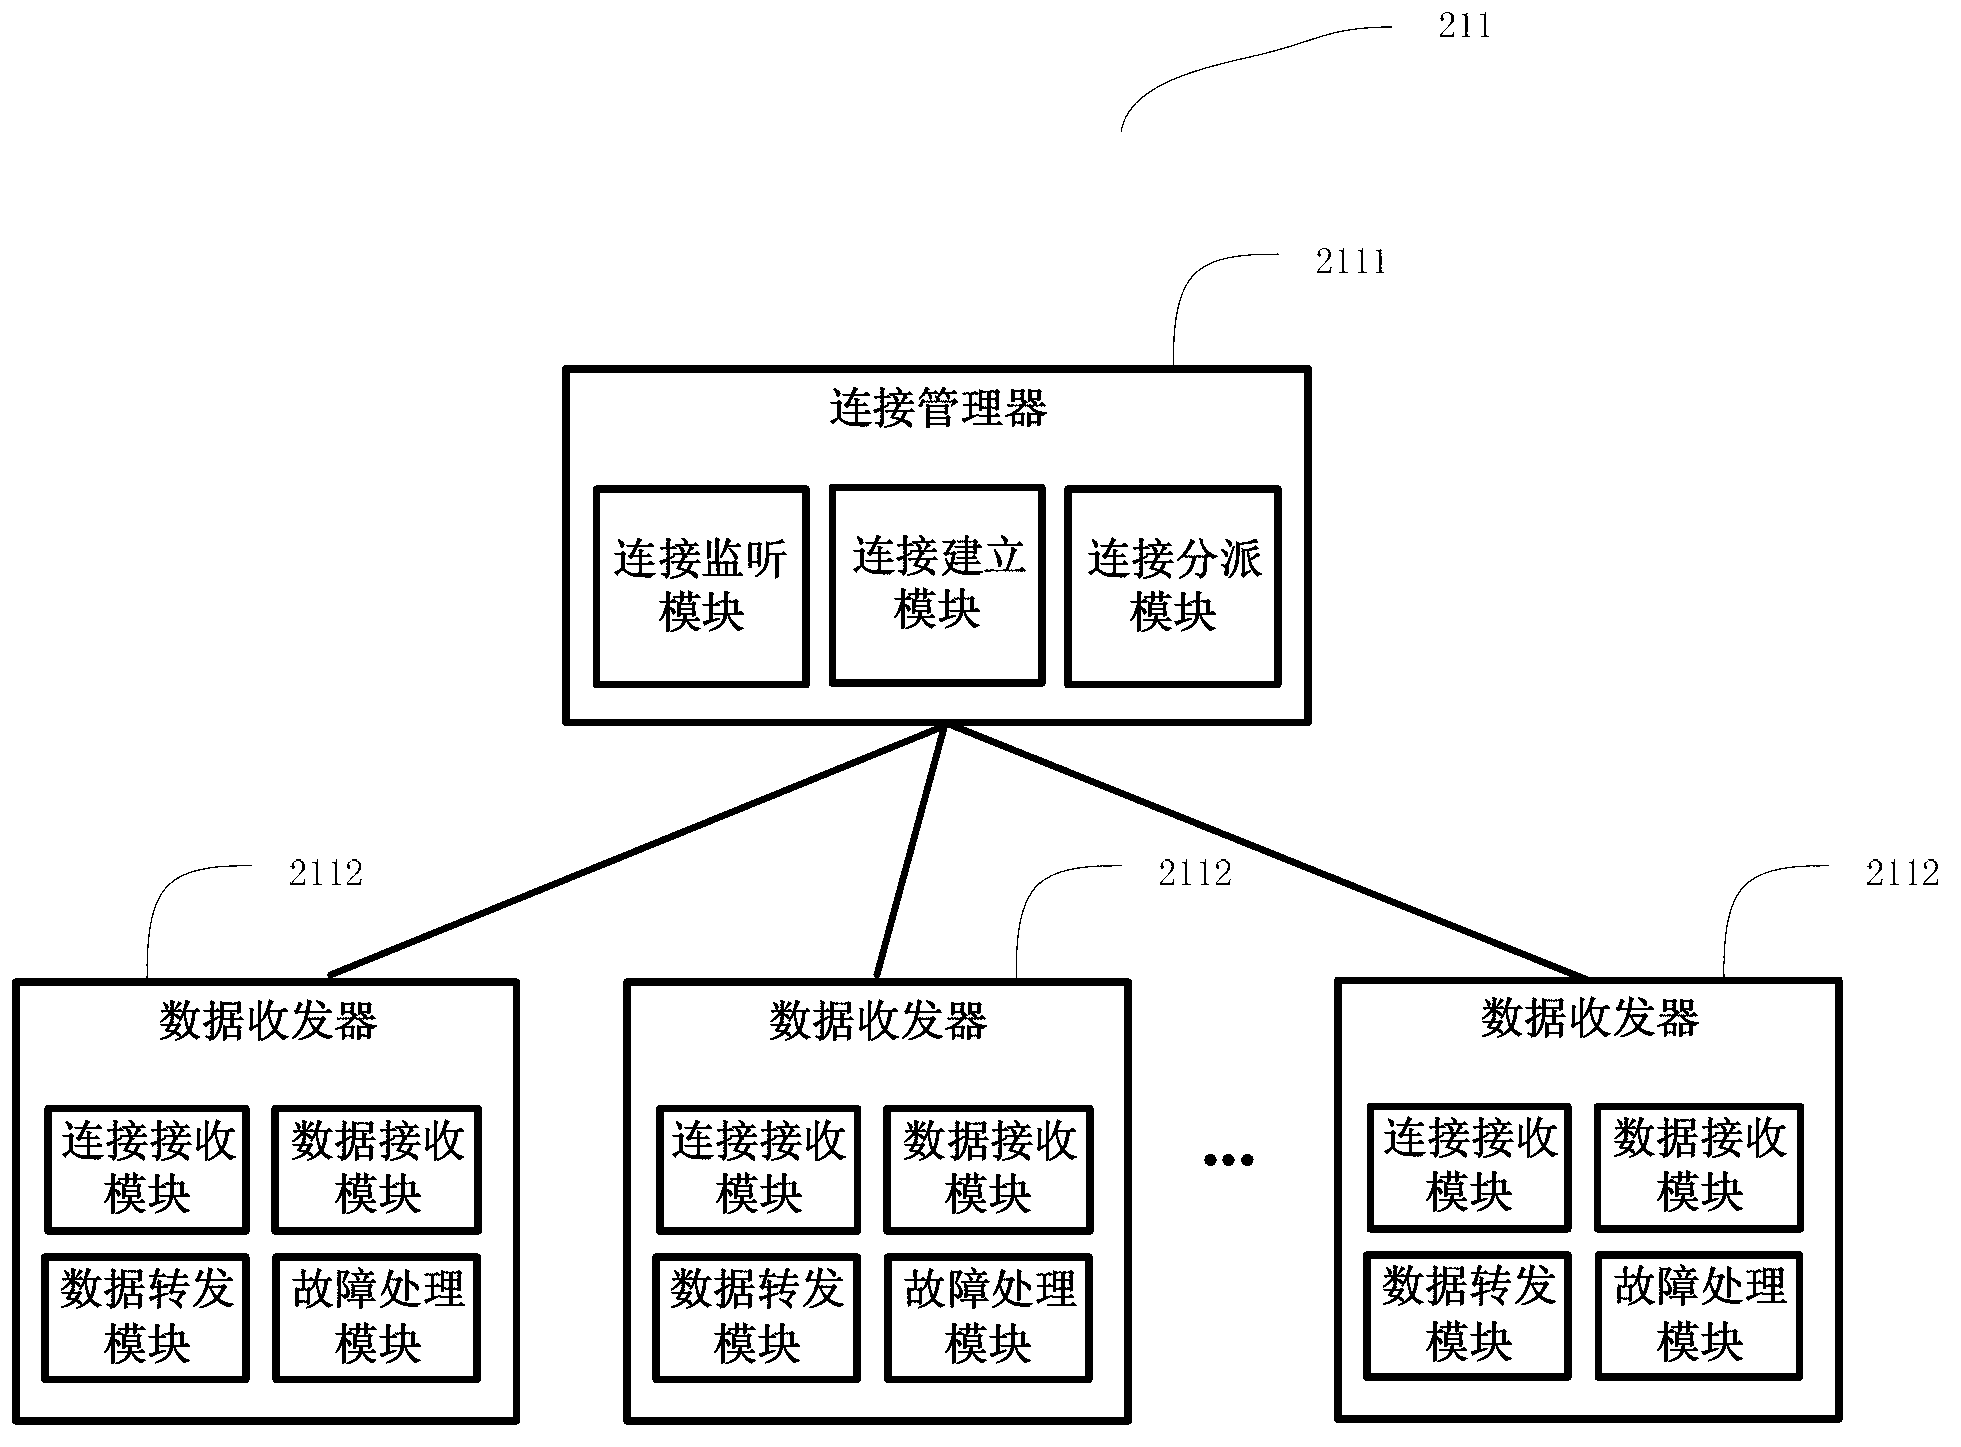 Parallel processing system and method for massive real-time traffic data